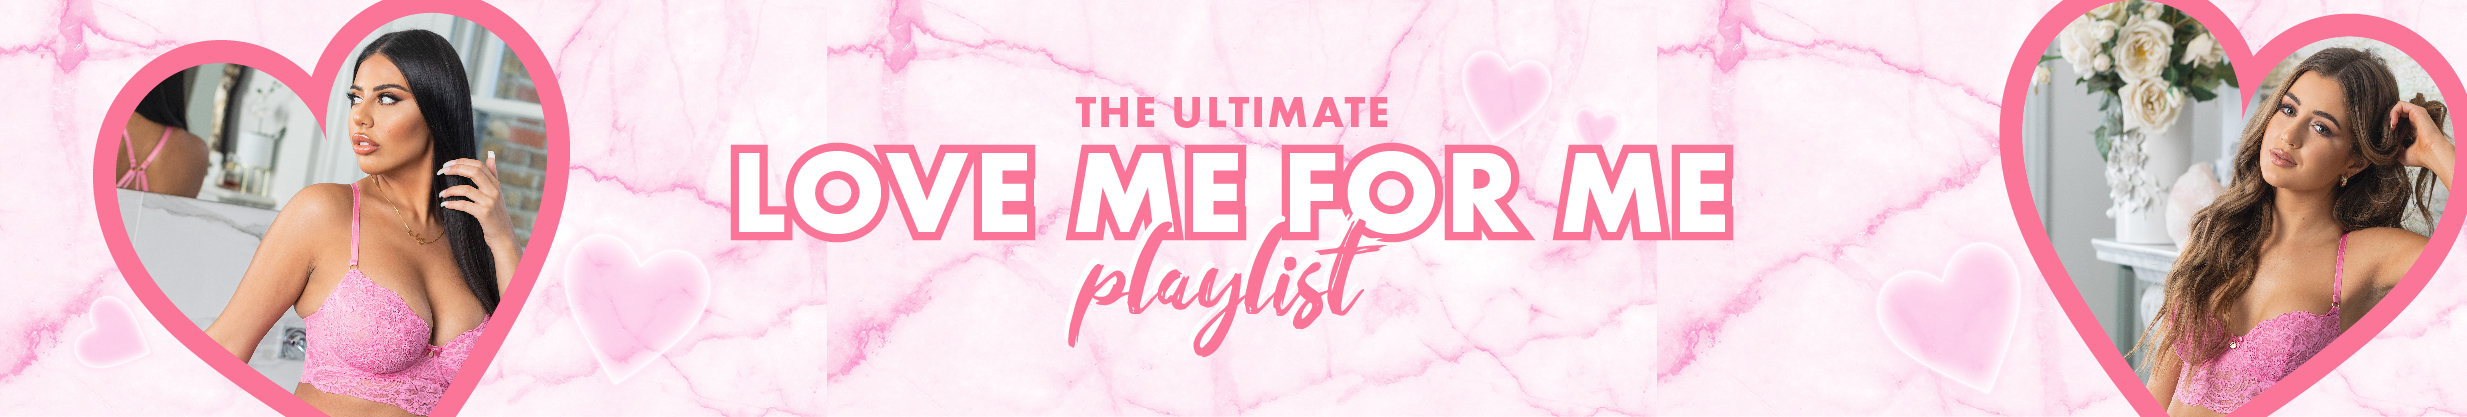 Love Me For Me Playlist